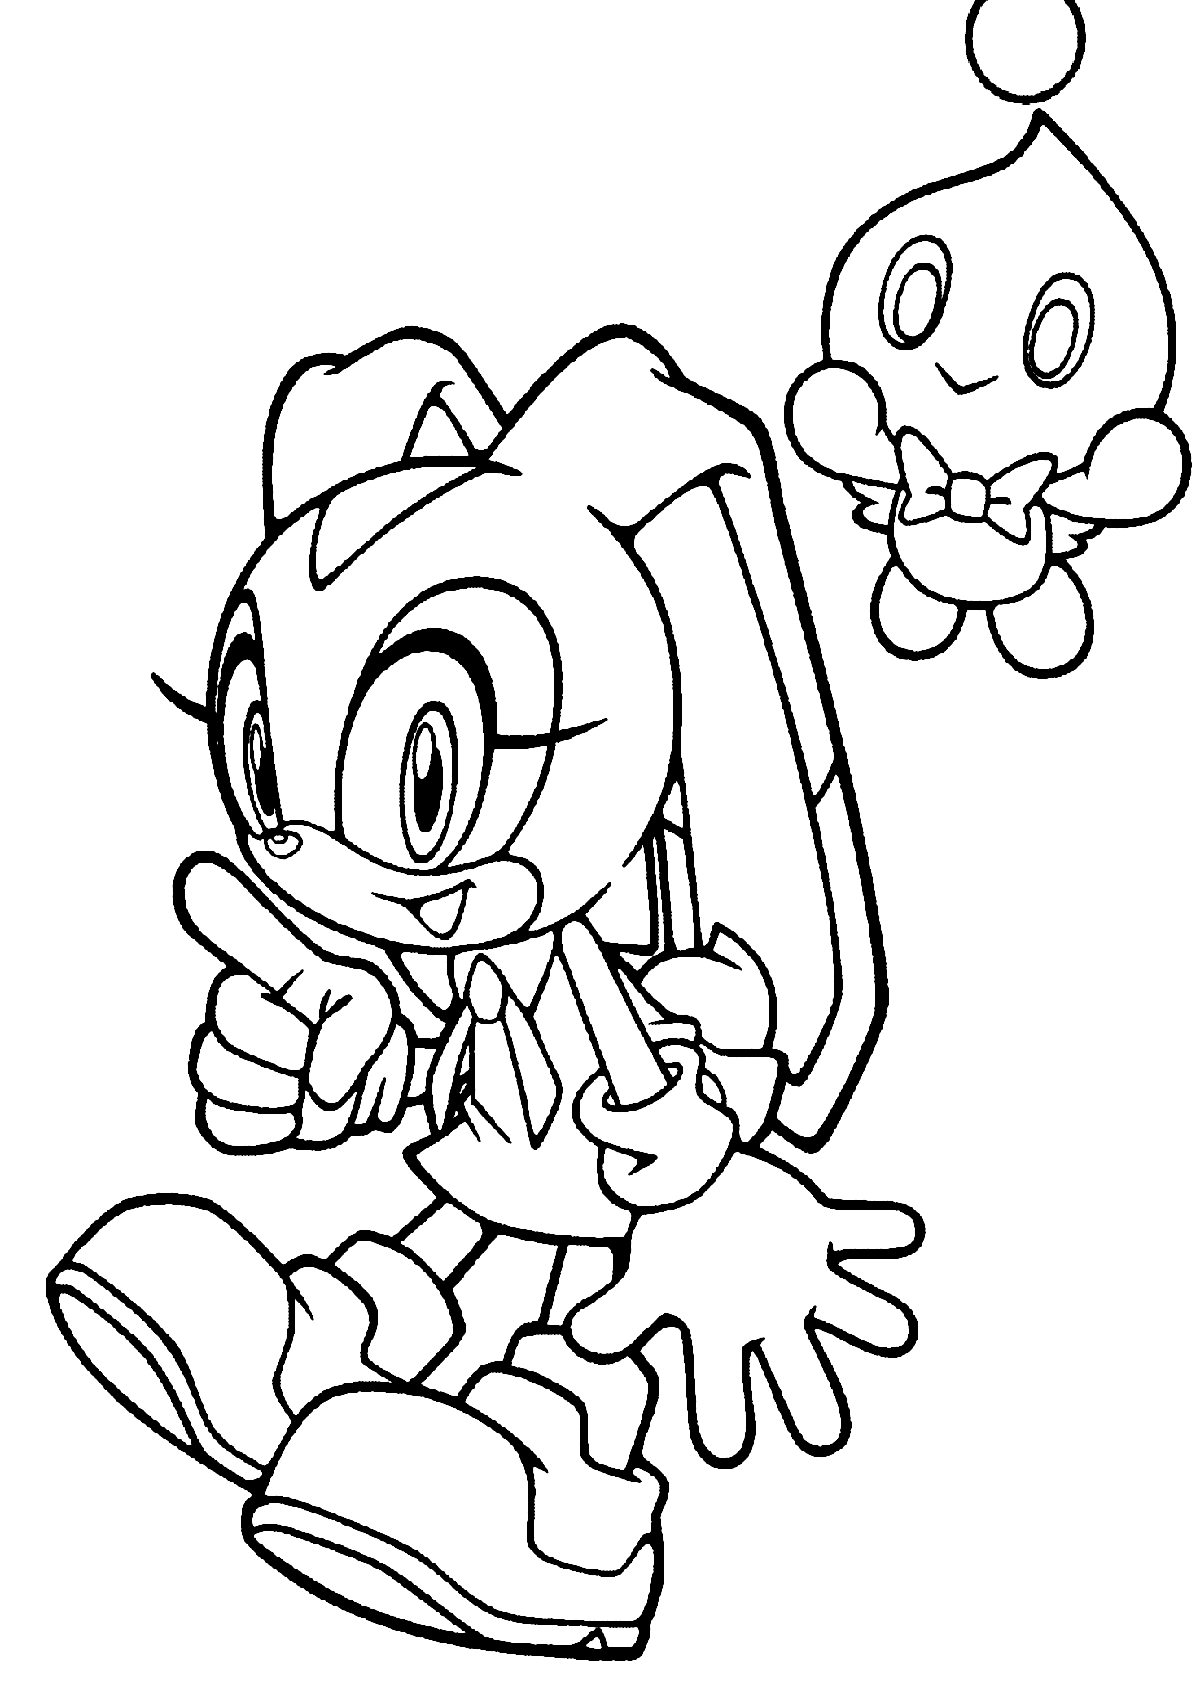 Download Sonic X Coloring pages 🖌 to print and color